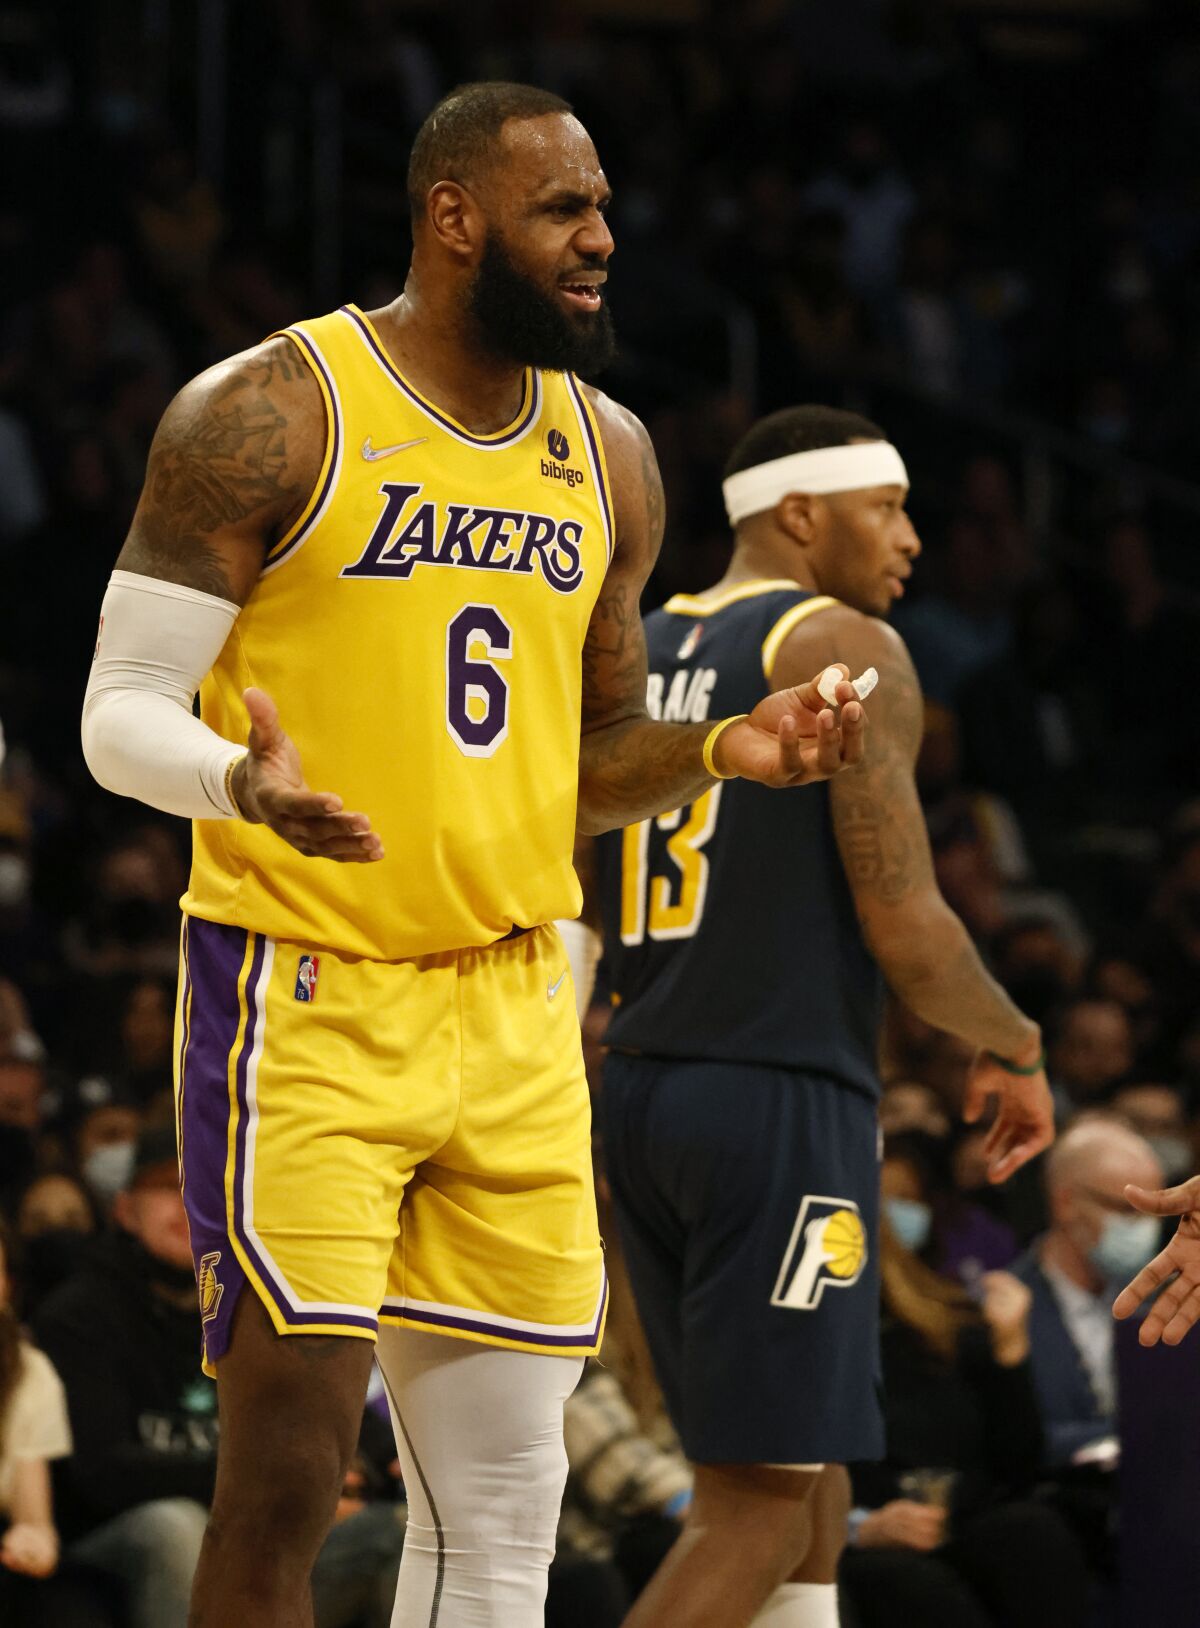 Lakers forward LeBron James questions a technical foul called on forward Carmelo Anthony.